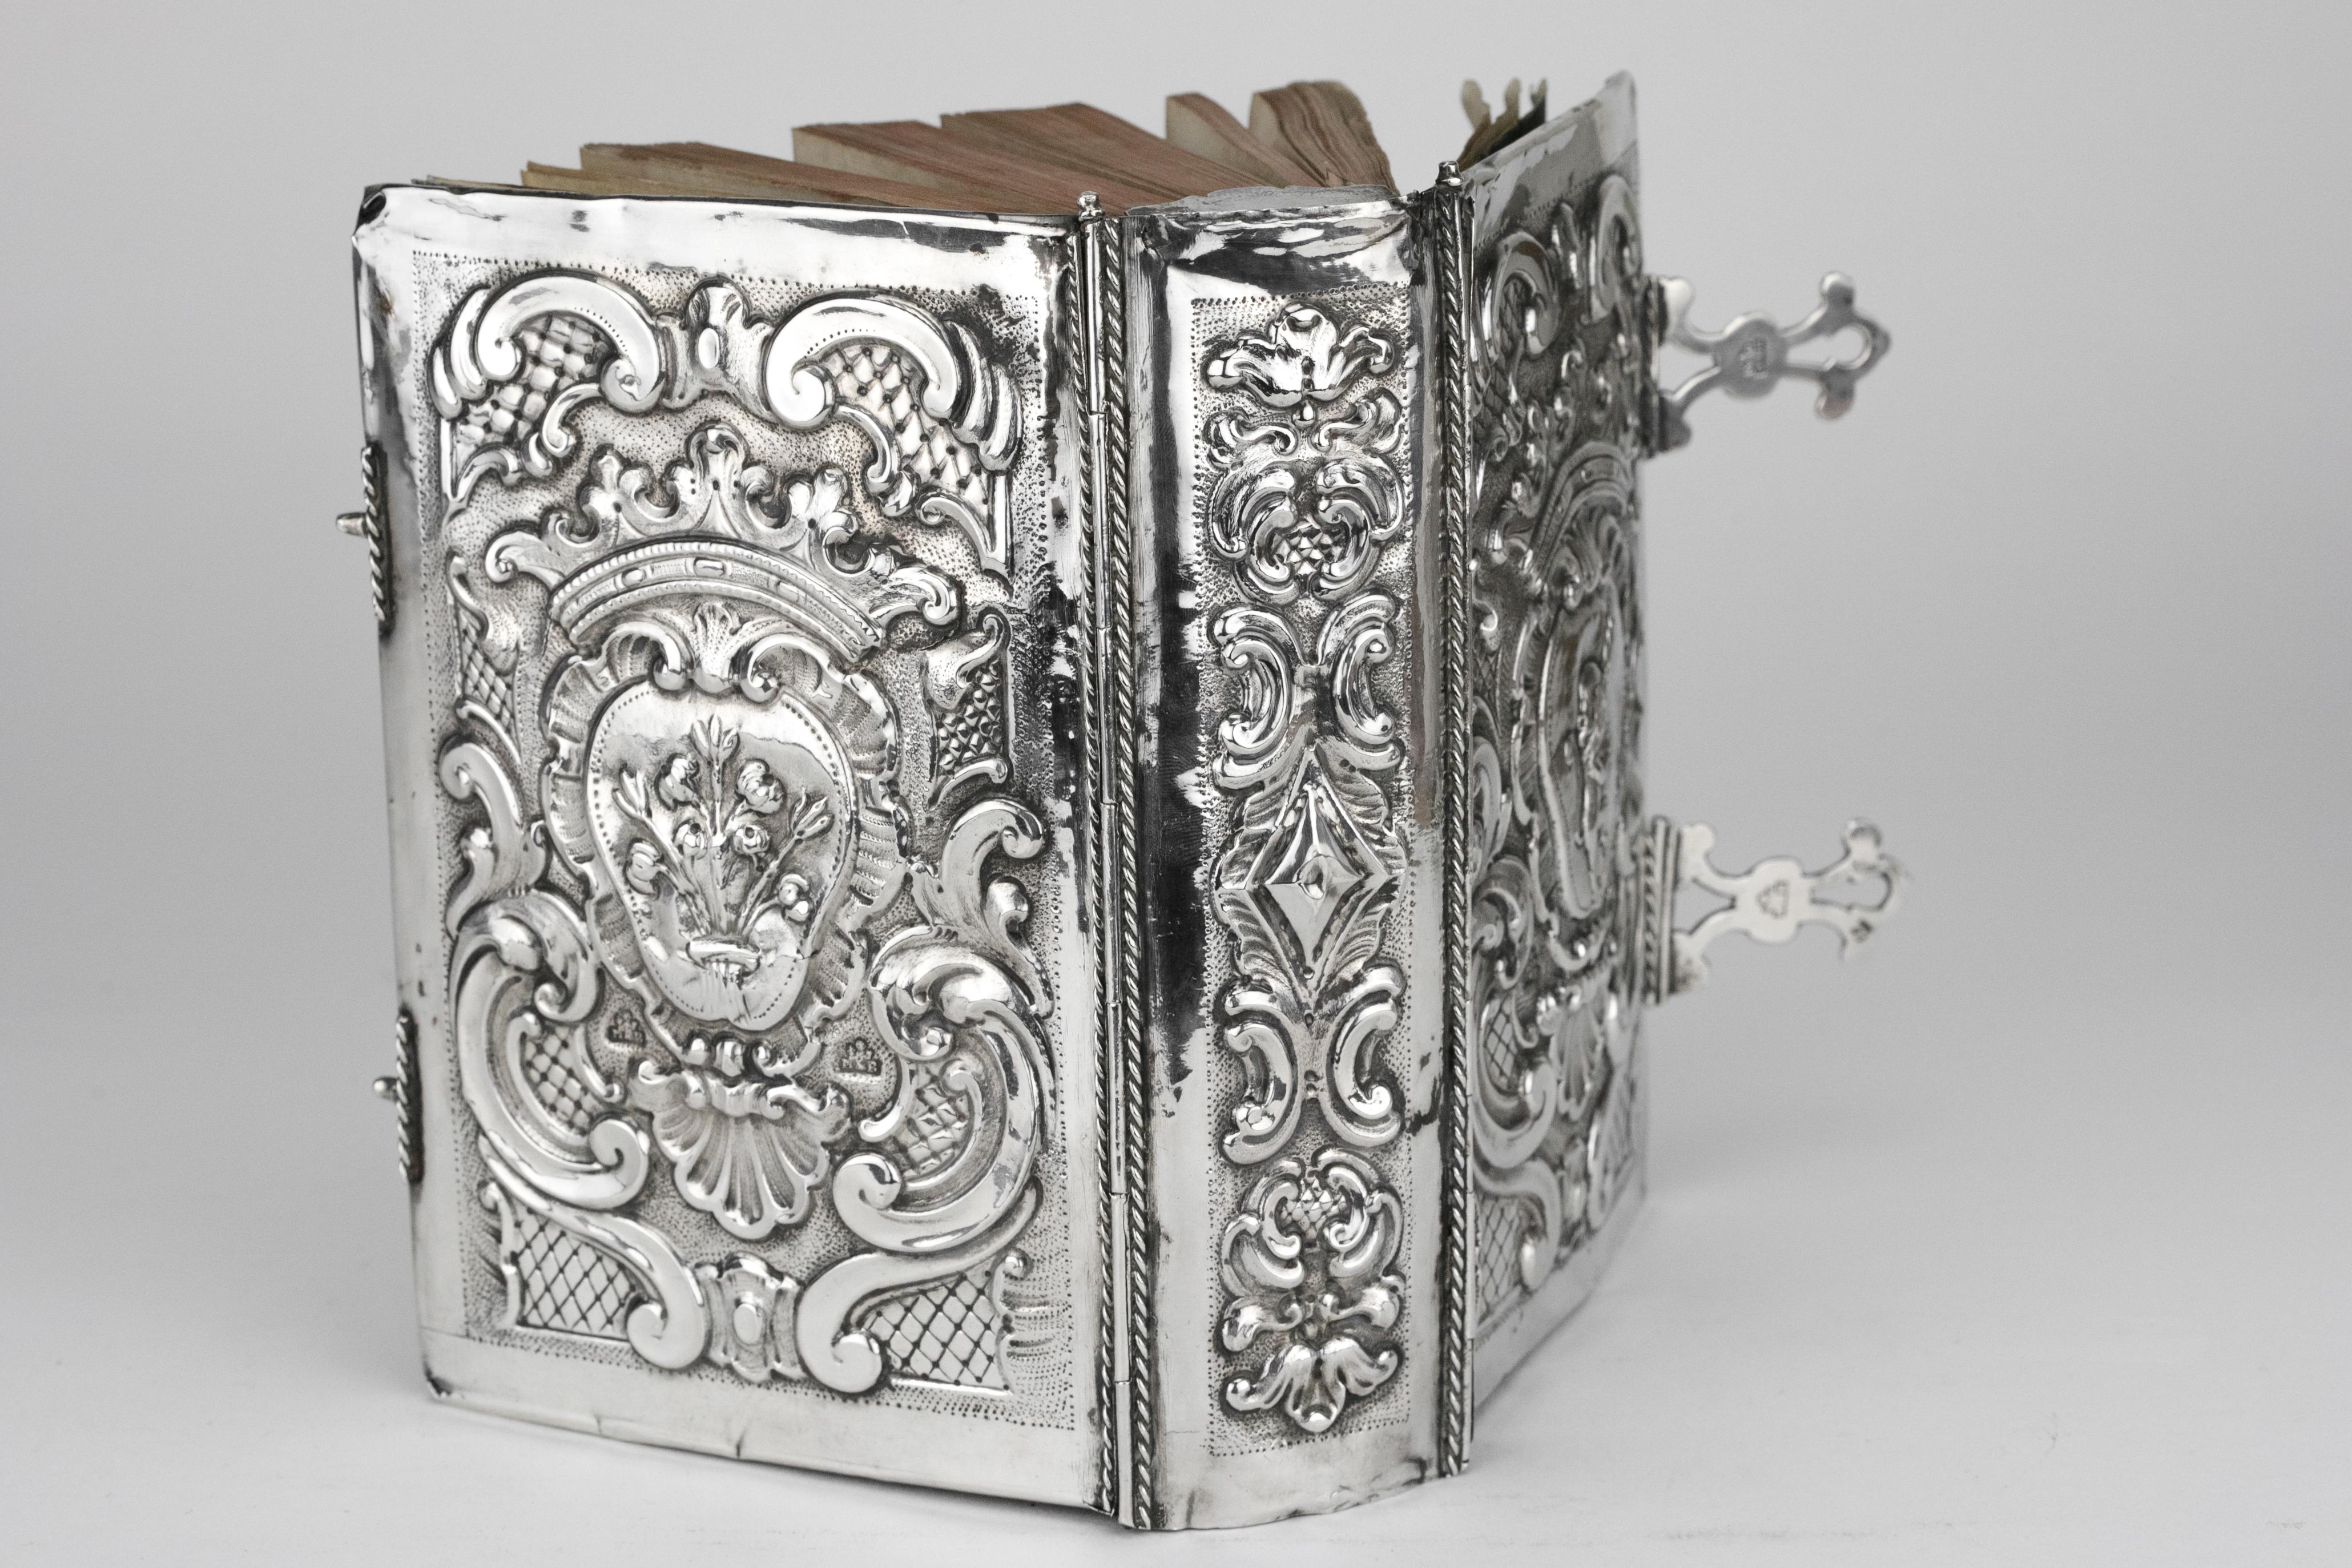 Handmade Italian silver book binding, maker's mark MB with figure holding emblems between for Marc'antonio Belotto of Padua, 1776-1788.
Both covers embossed with coats of arms in baroque cartouches under coronets on matted and trellis grounds, the